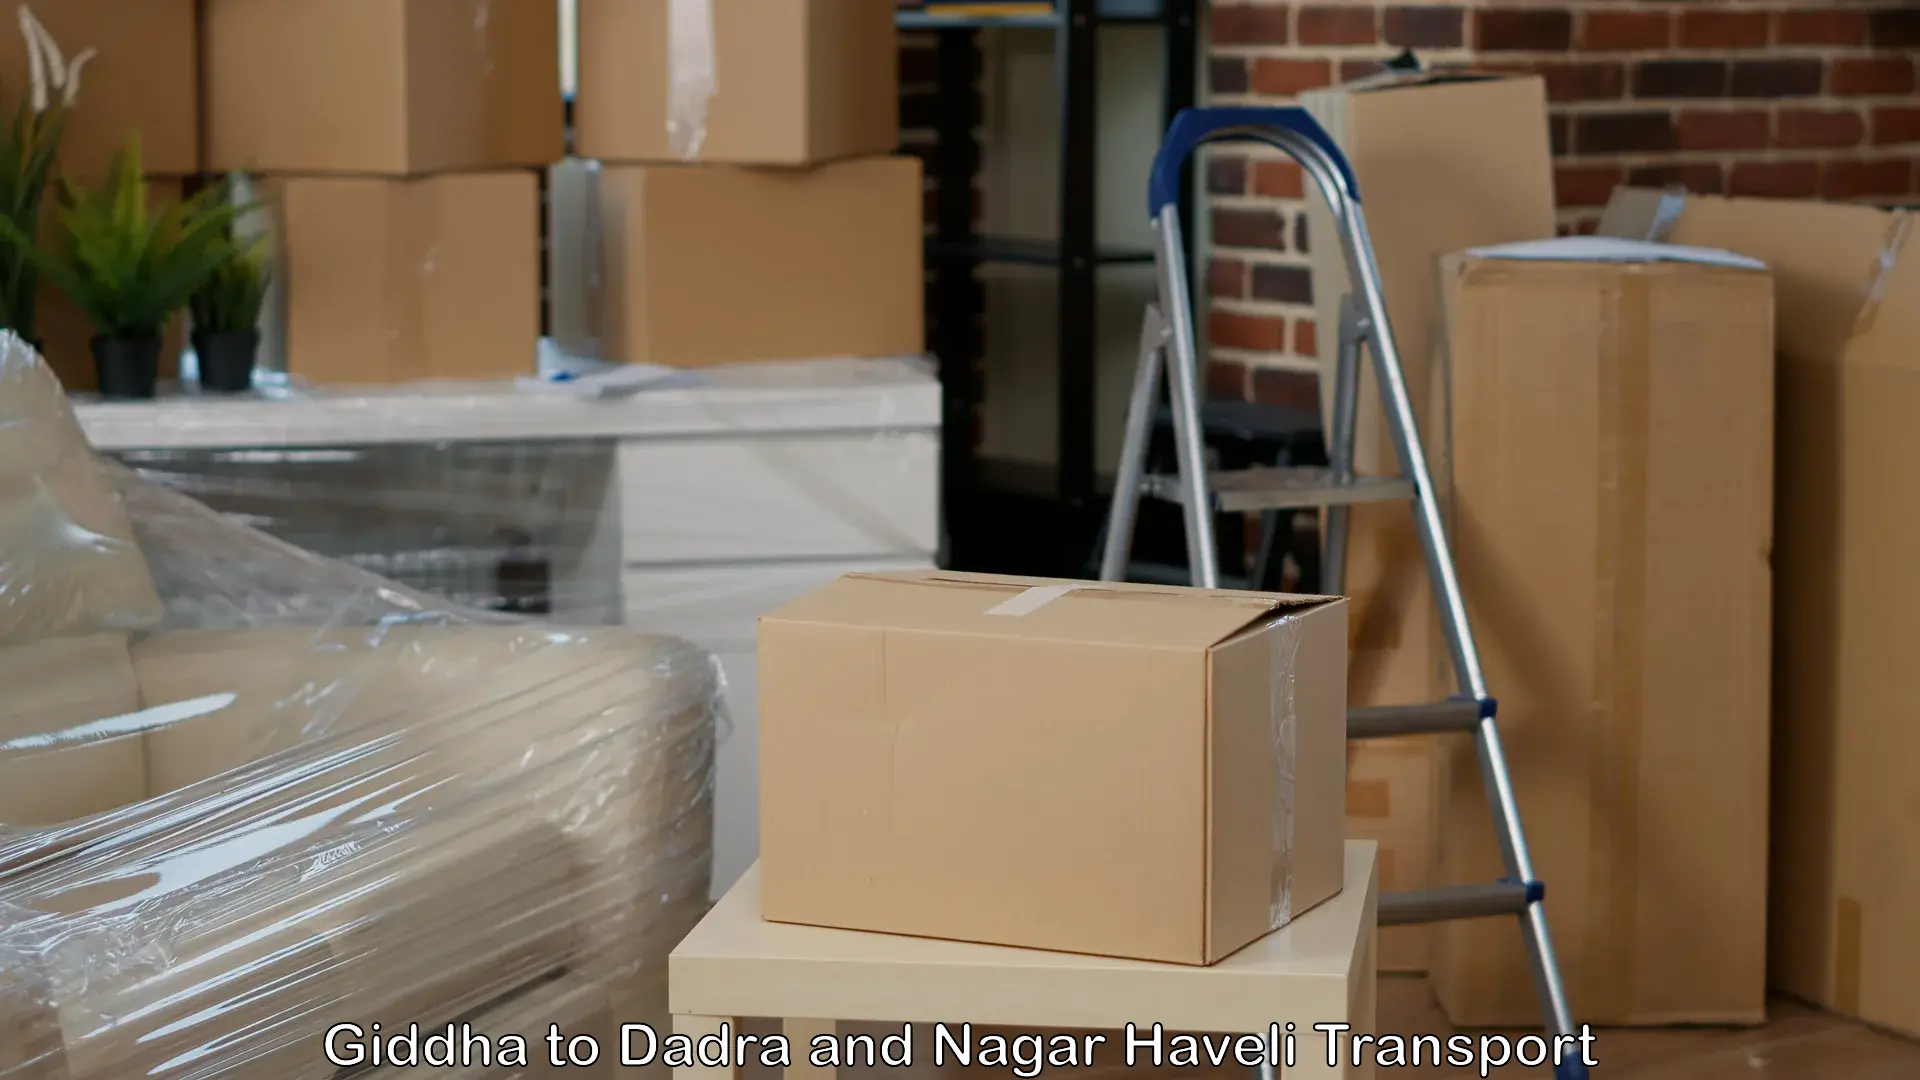 Shipping services in Giddha to Dadra and Nagar Haveli